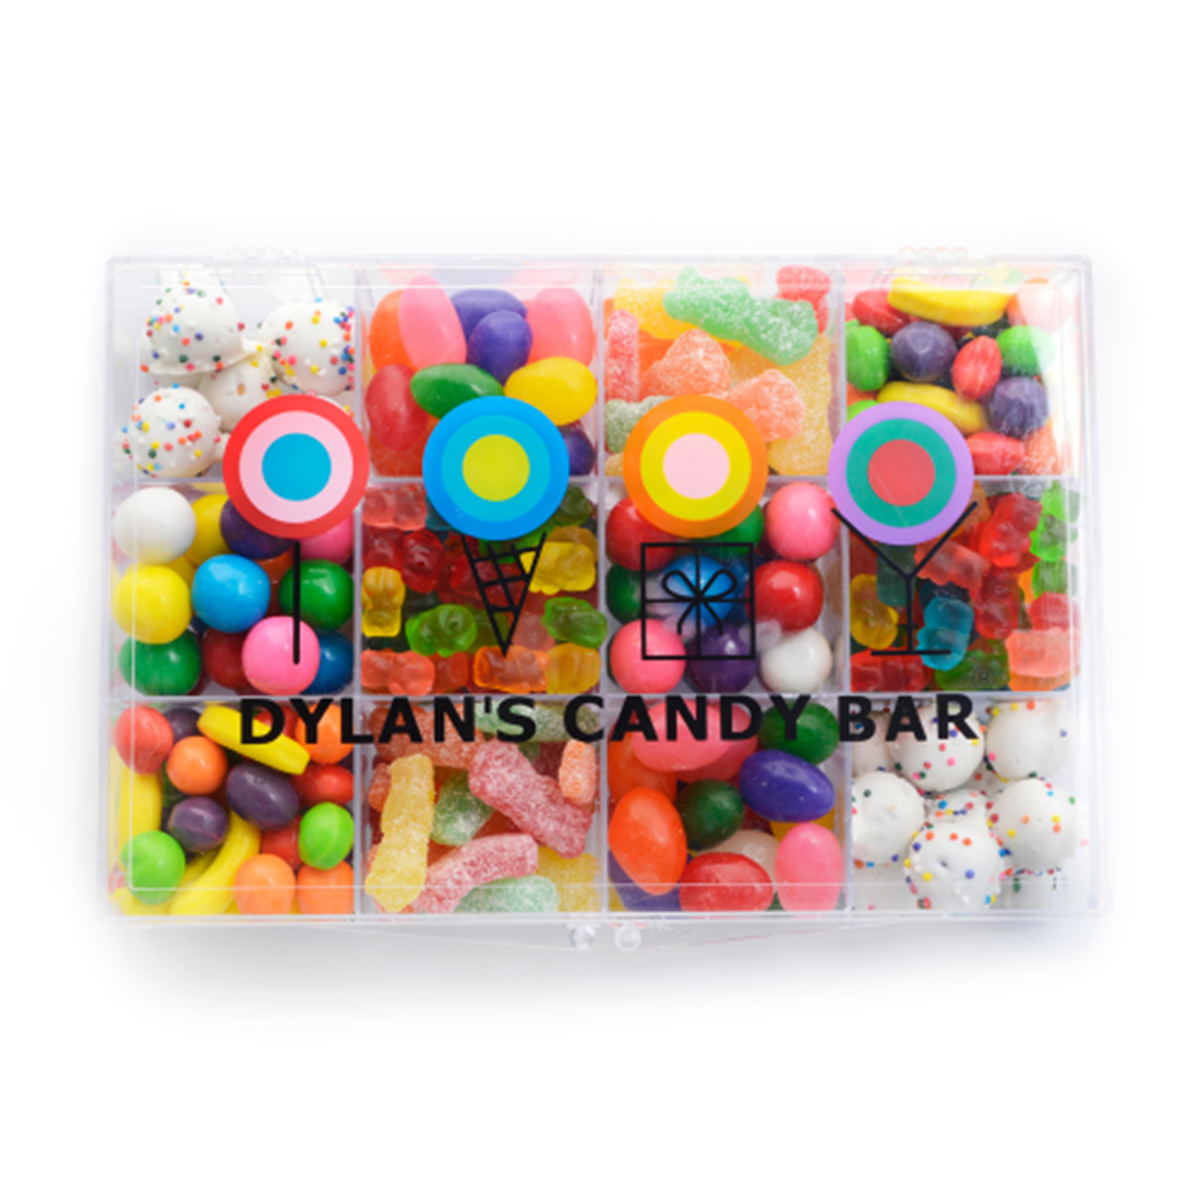 (Dylan's Candy)